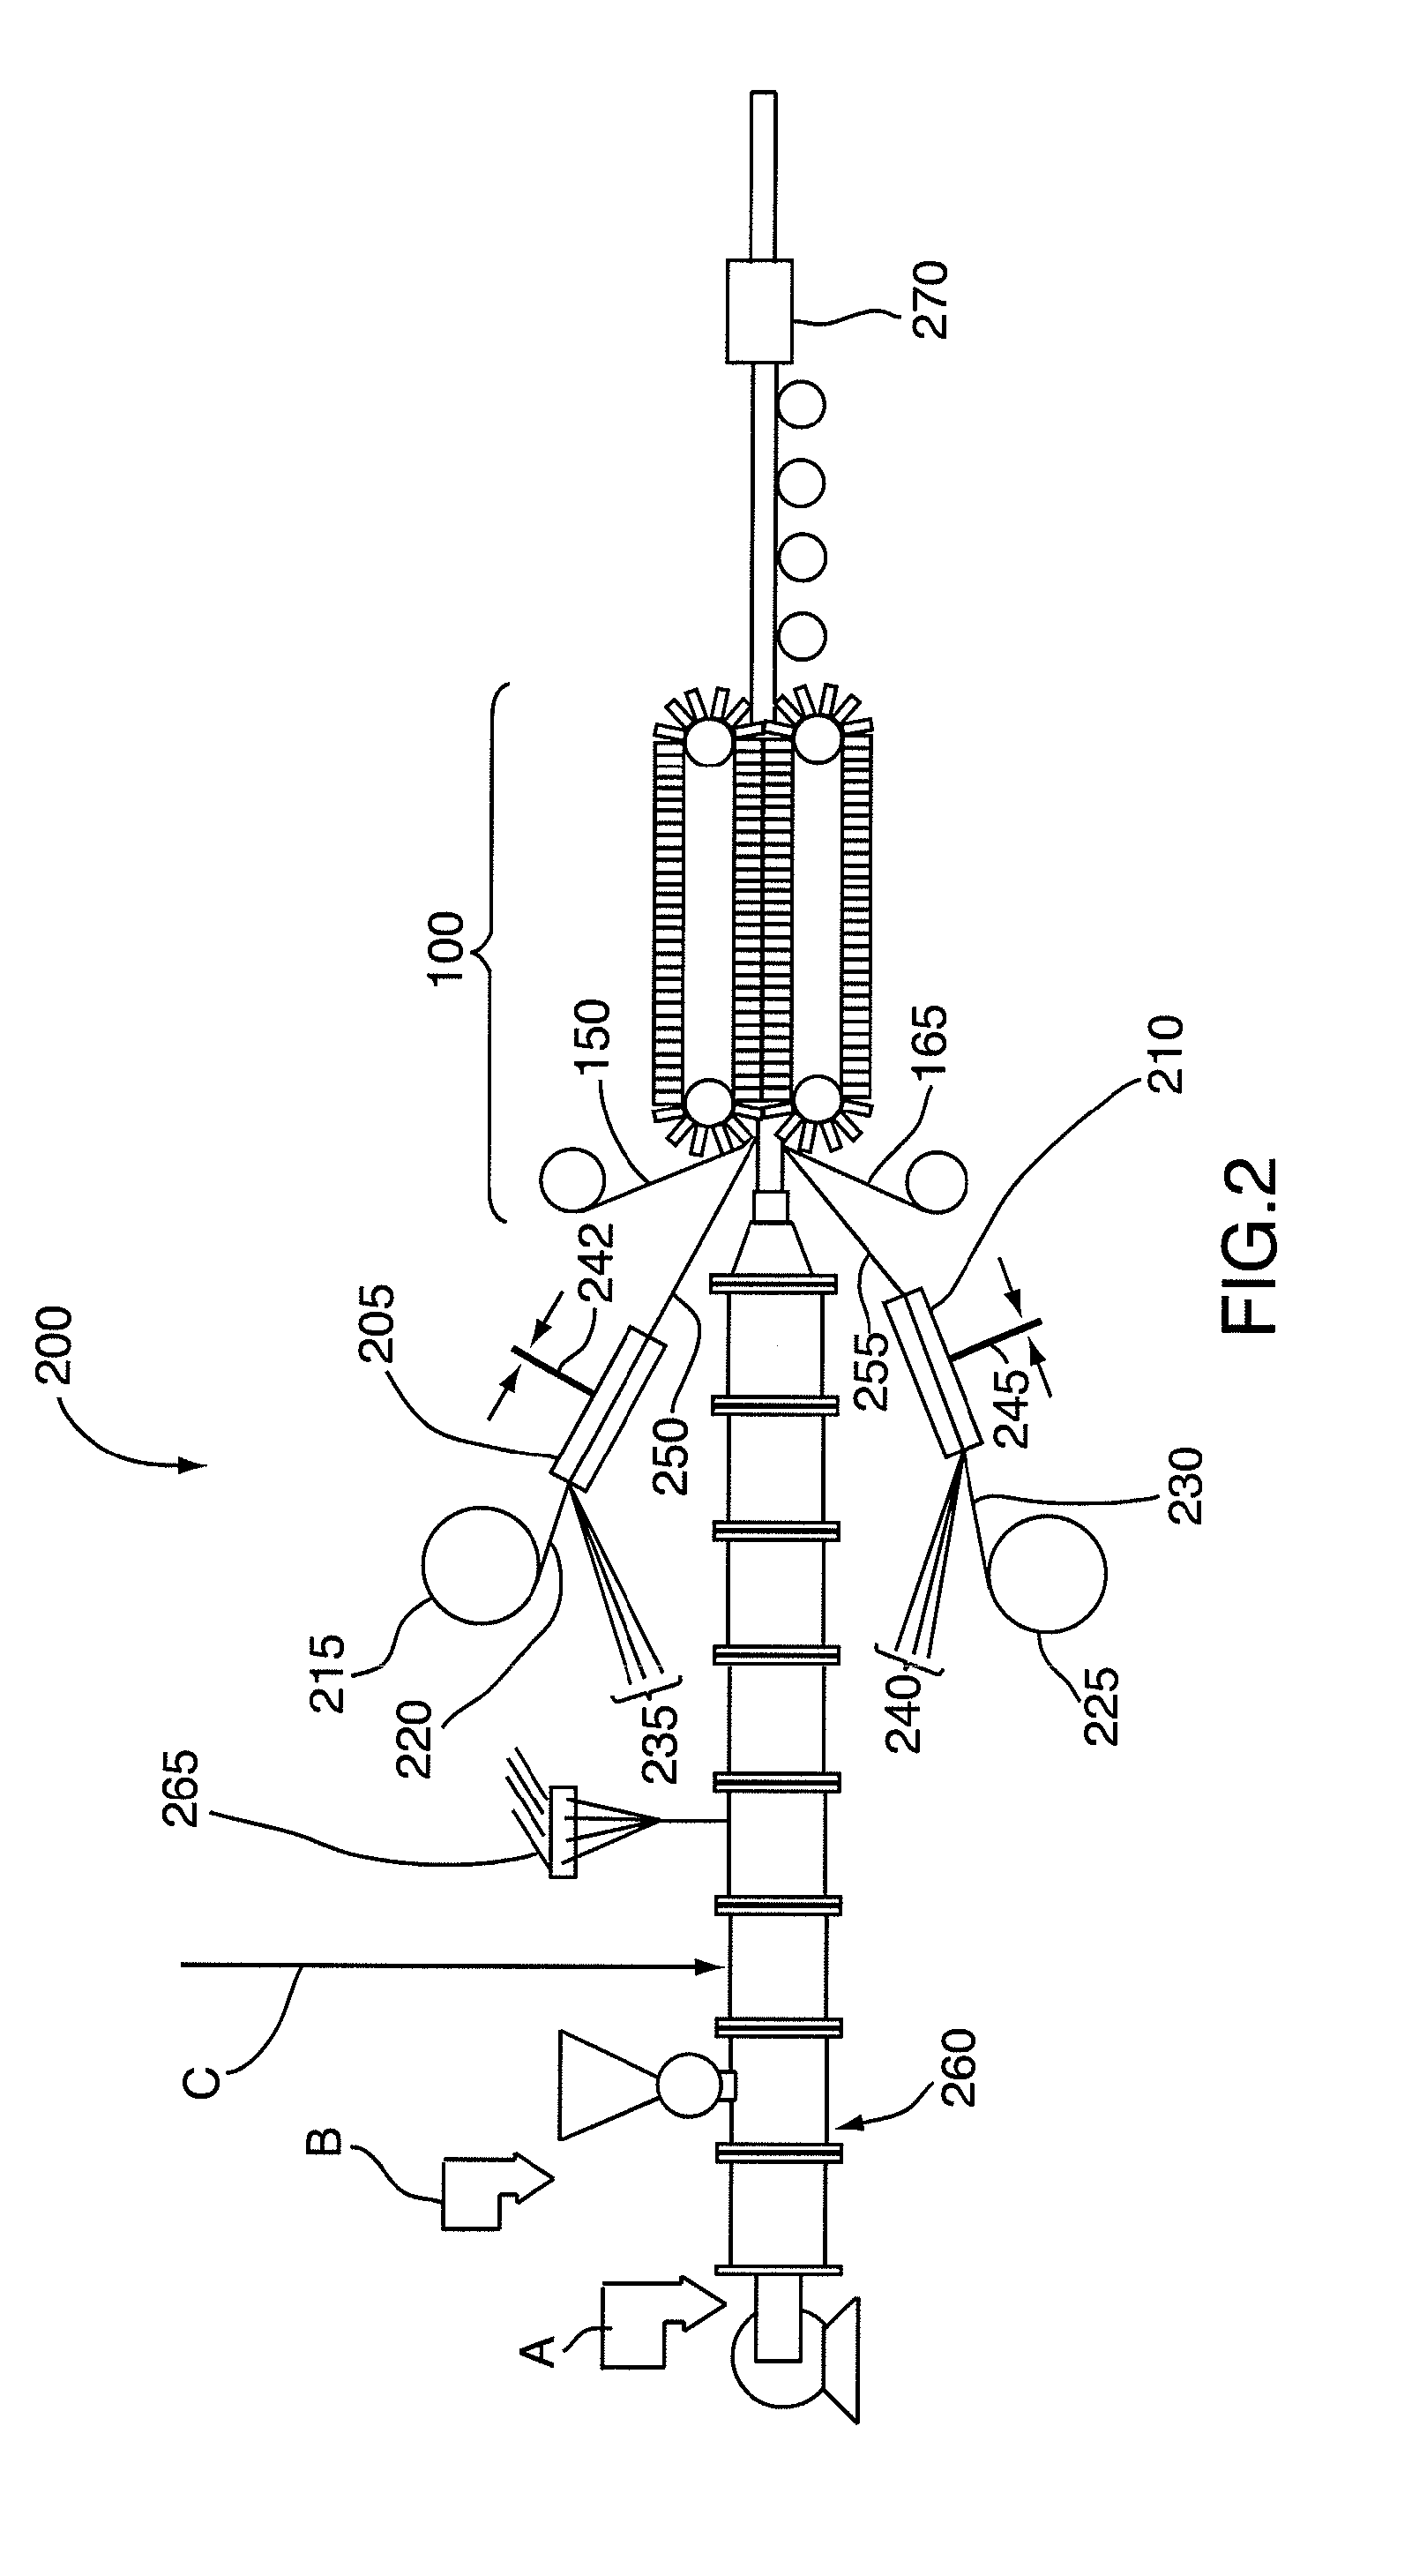 Process for producing a molded product